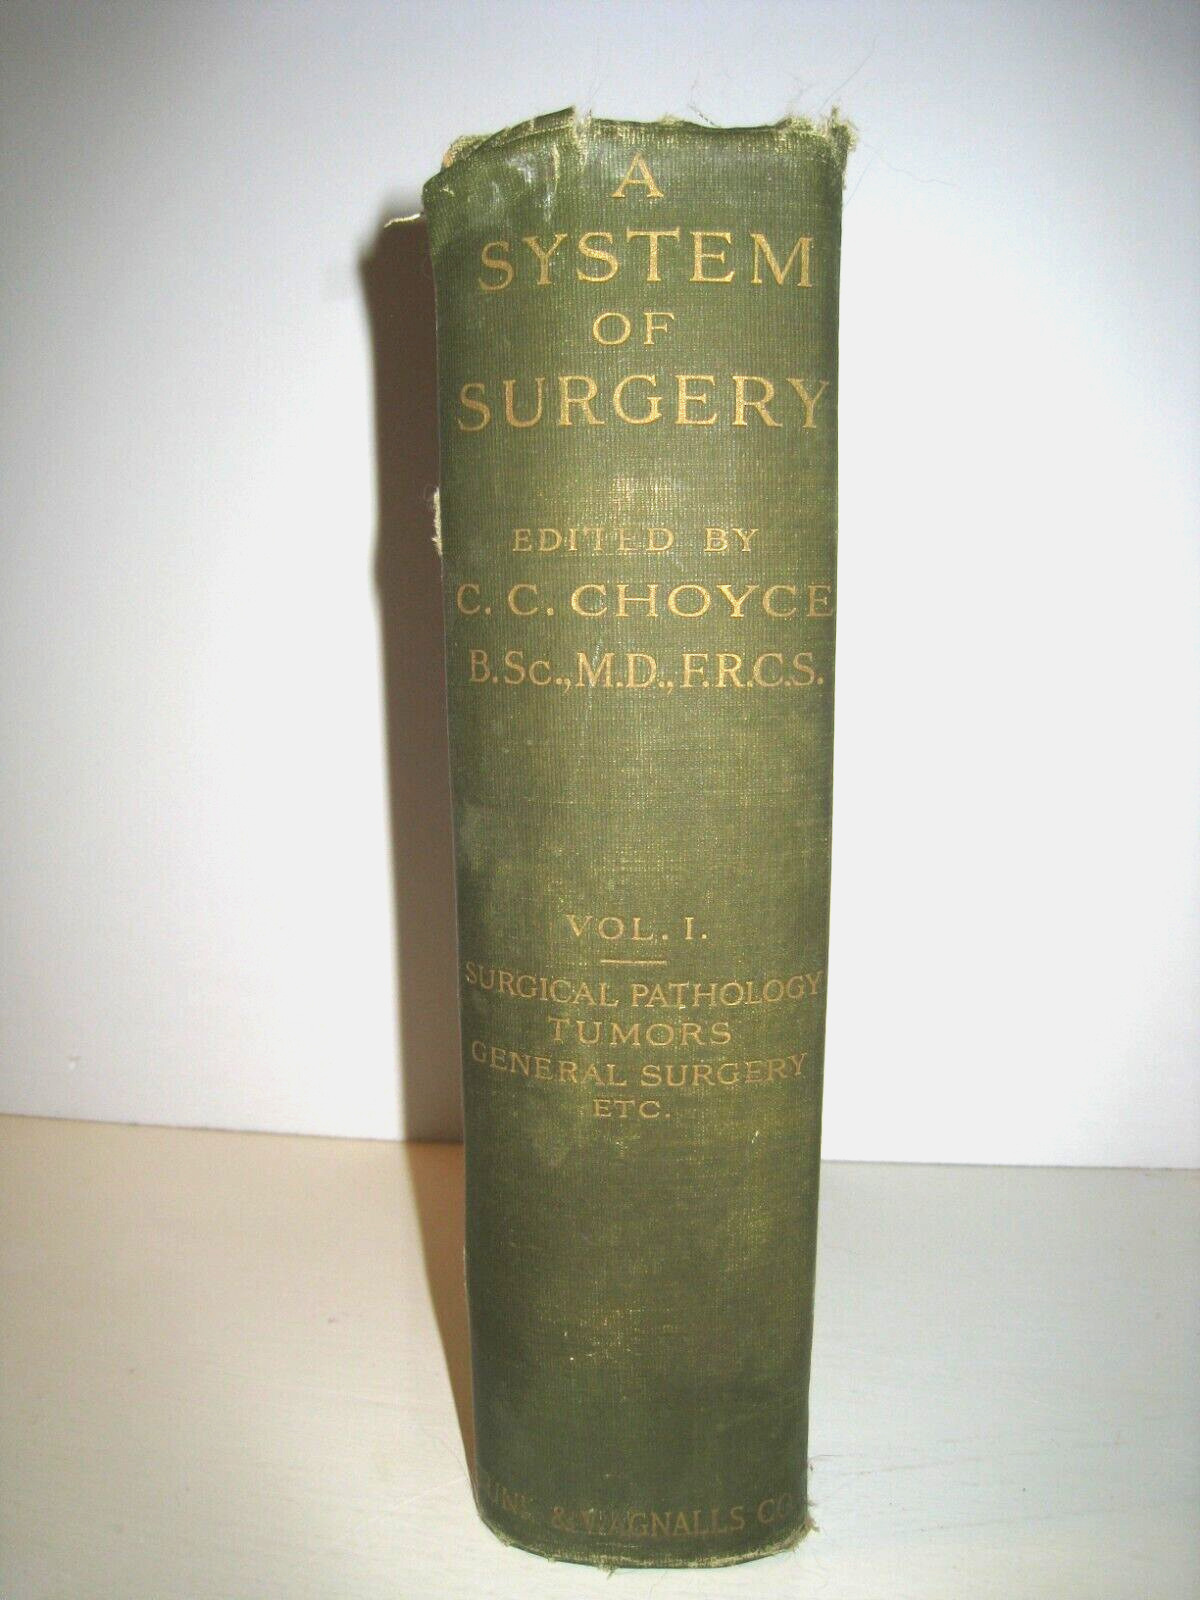 A SYSTEM OF SURGERY BY C.C. CHOYCE HARDCOVER 1914 VOL I